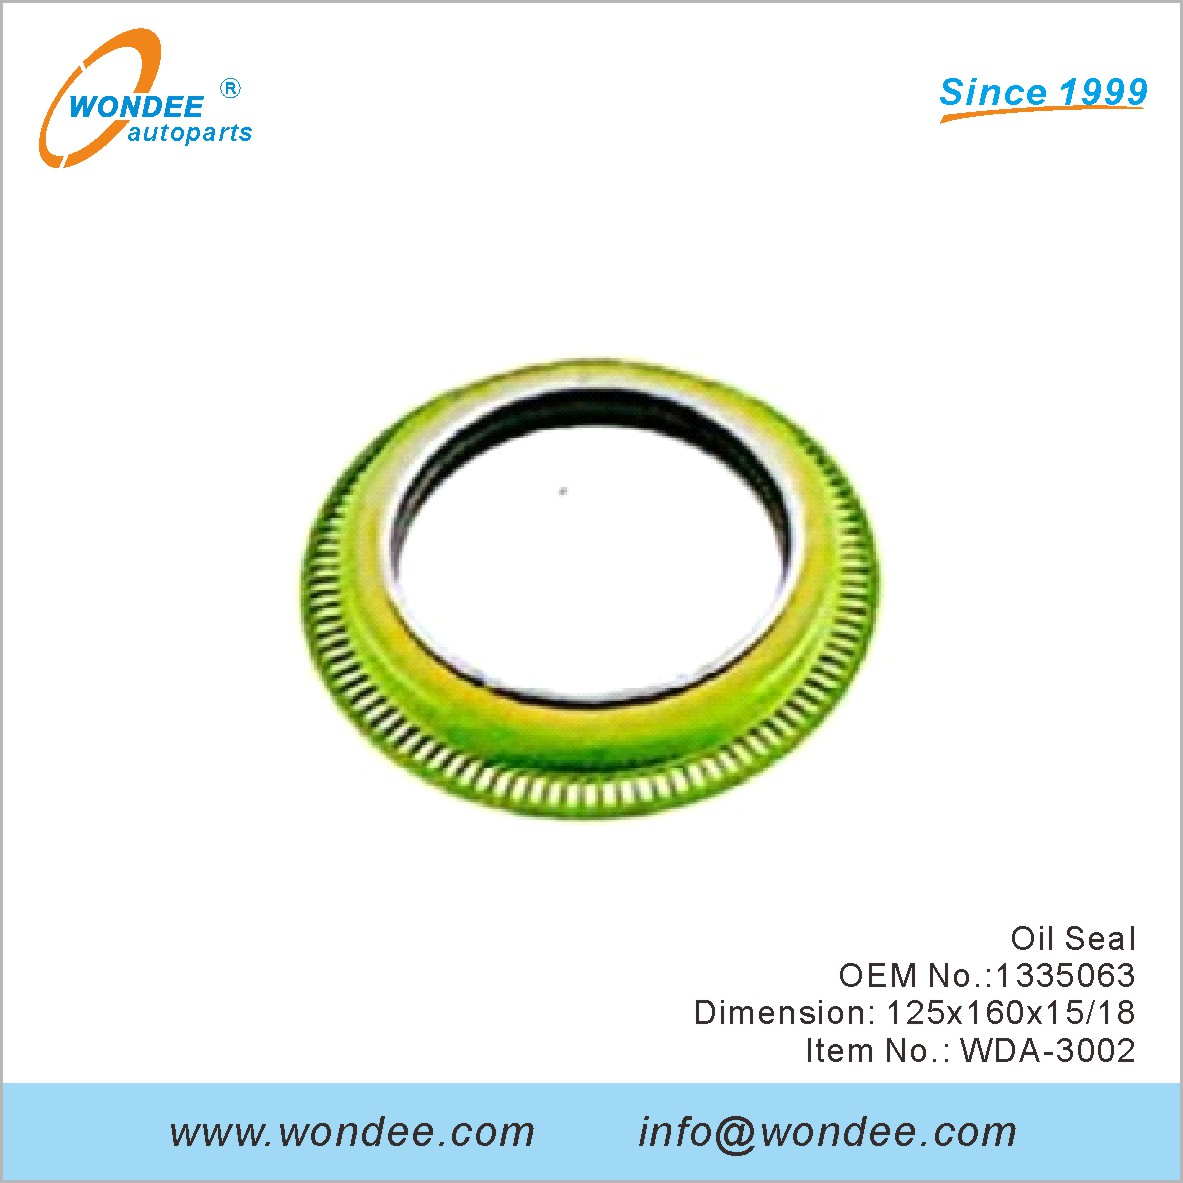 DAF Type Rubber Bushing, Stabilizer Bearing, Repair Kits, Oil Seal, ABS Ring for Truck